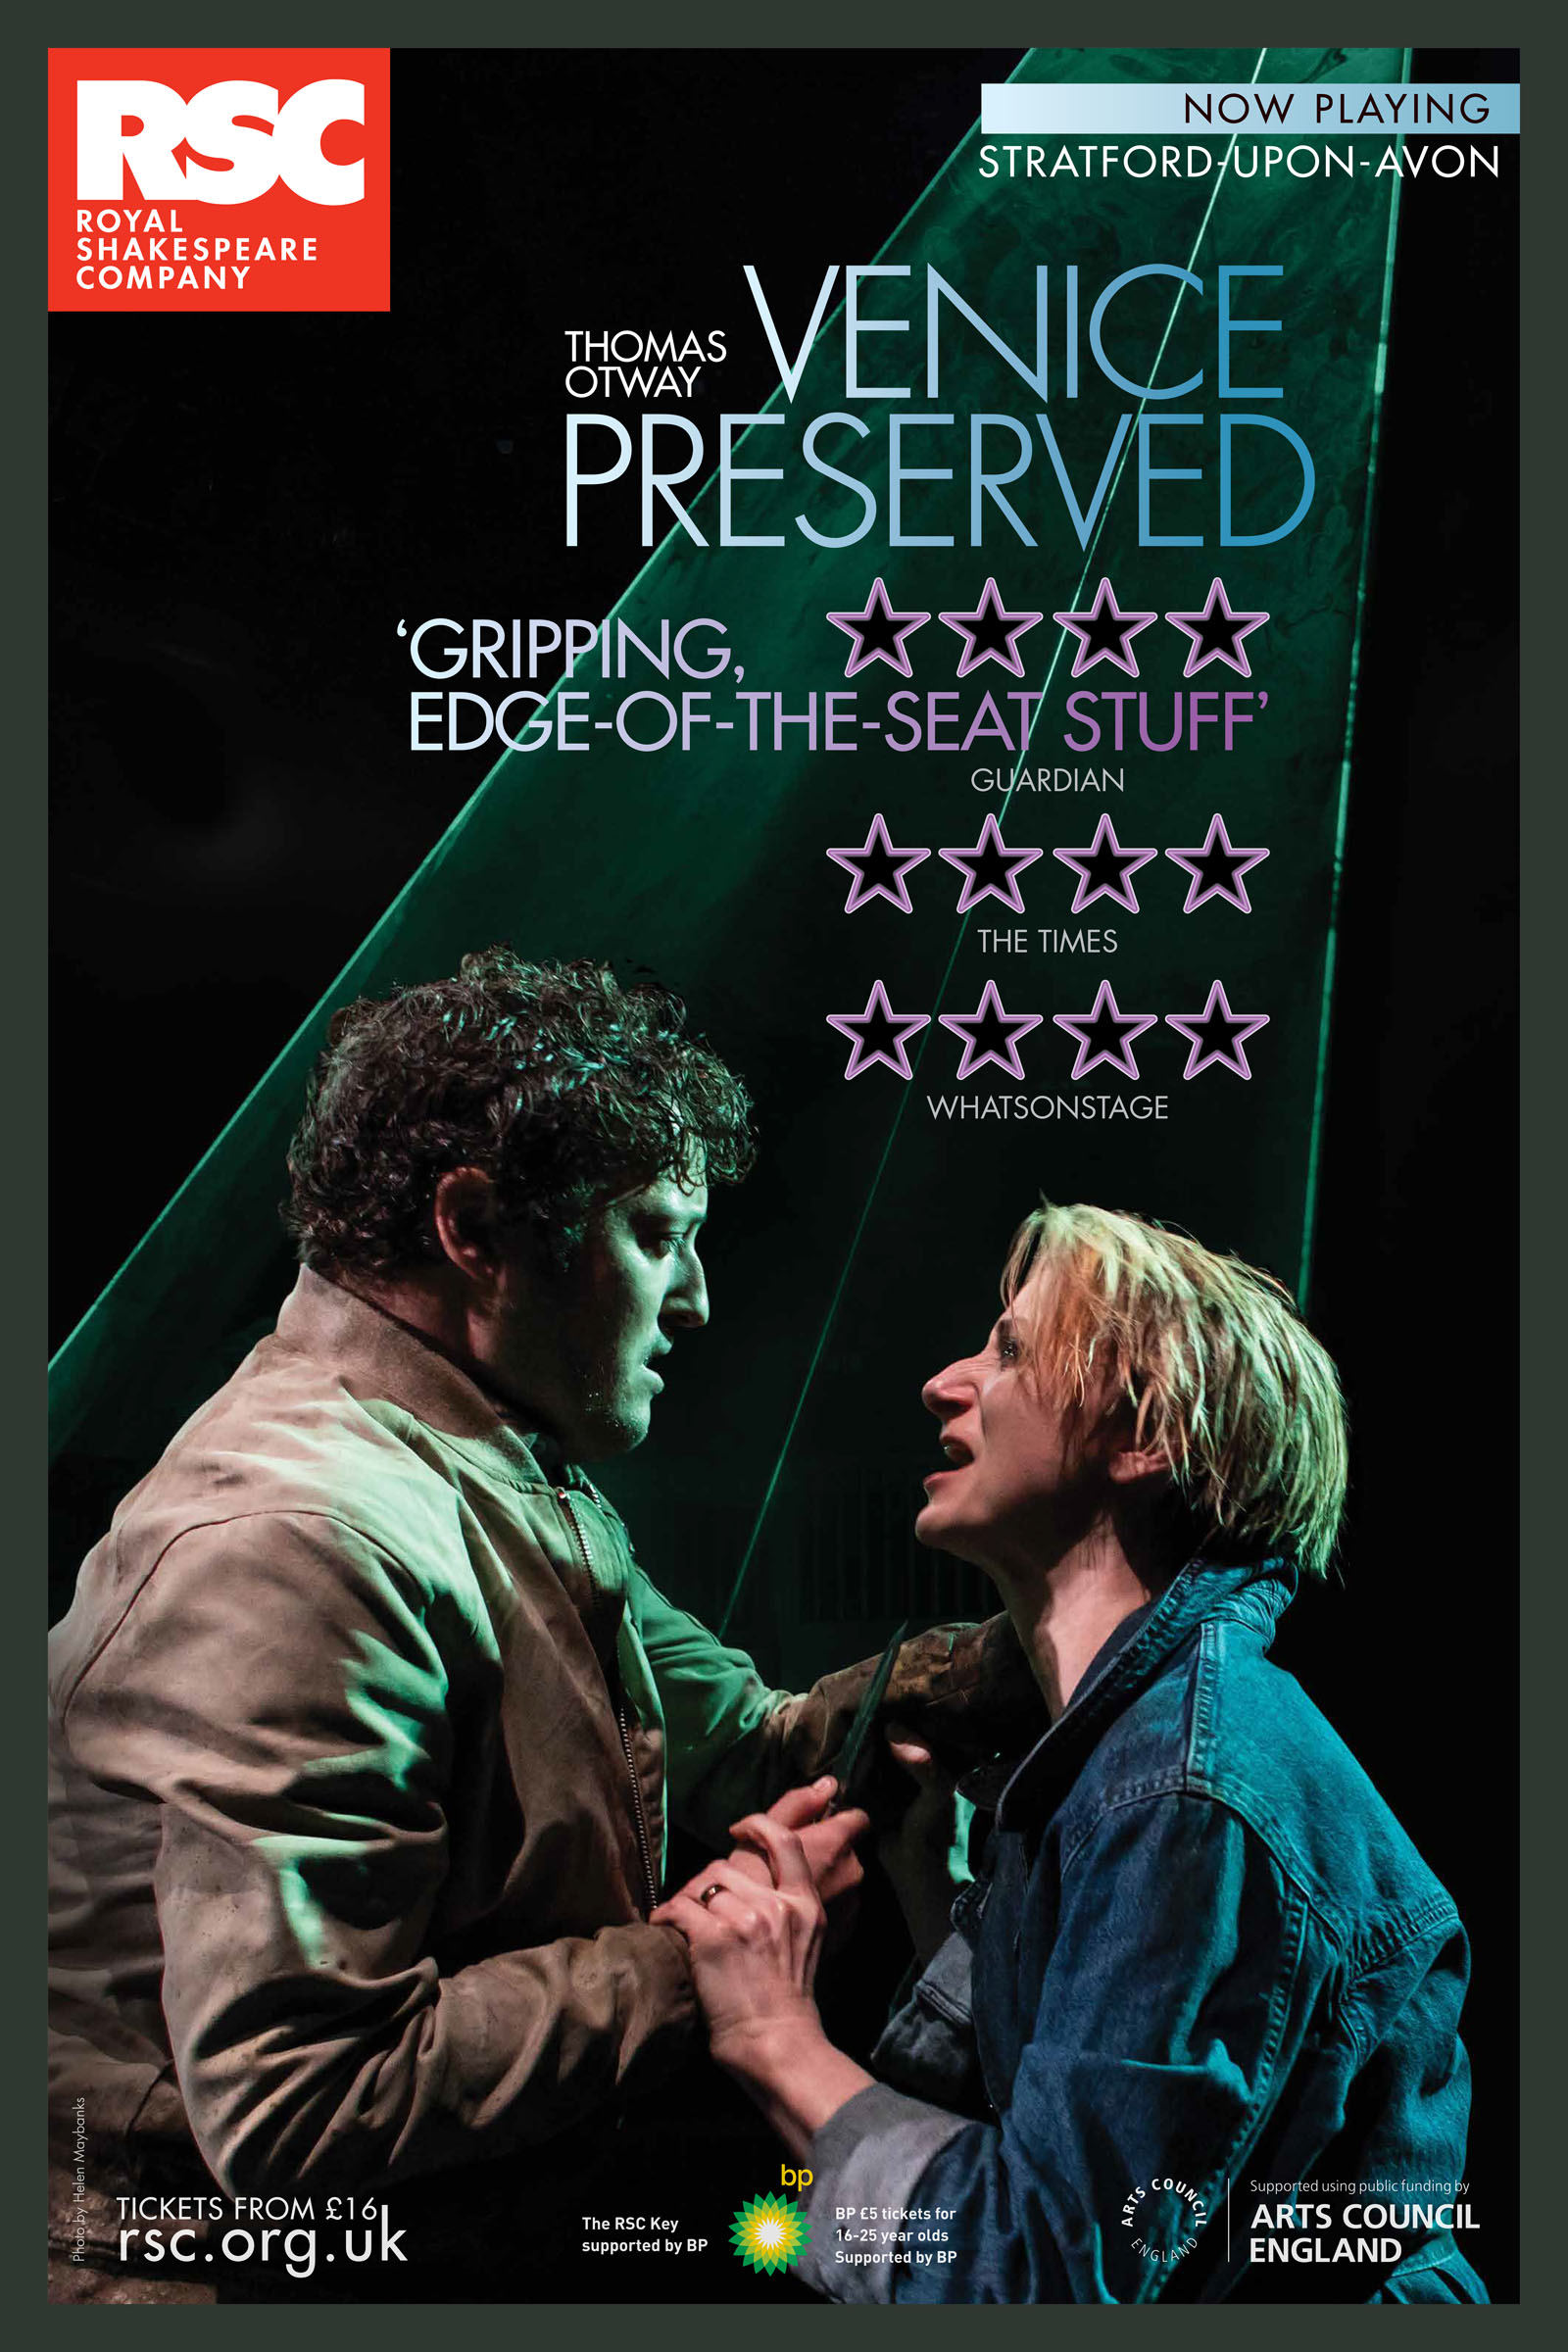 The poster for Venice Preserved at the RSC